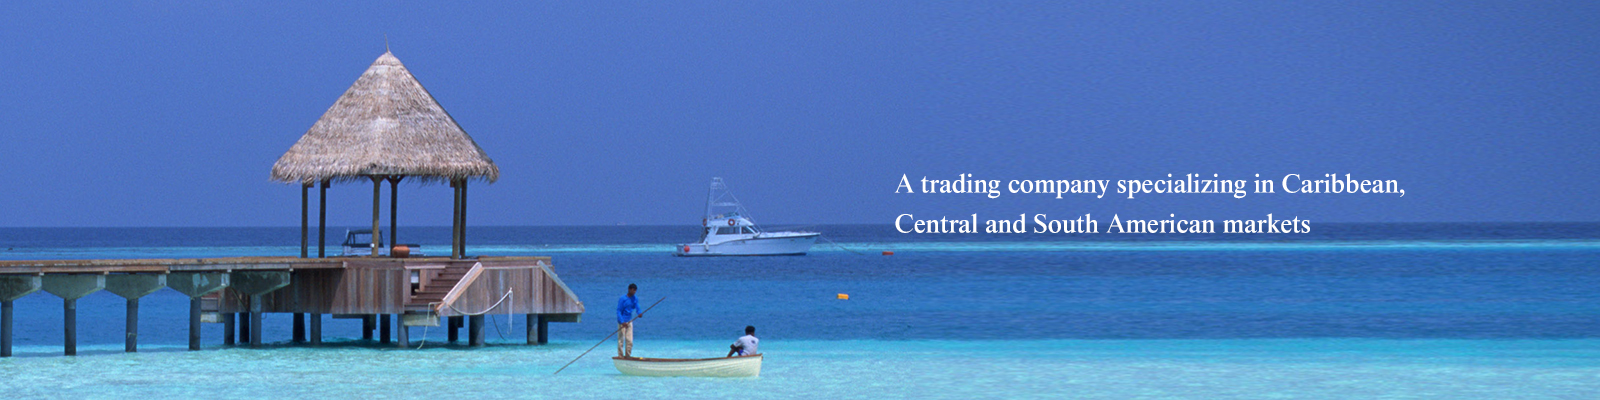 A trading company specializing in Caribbean, Central and South American markets